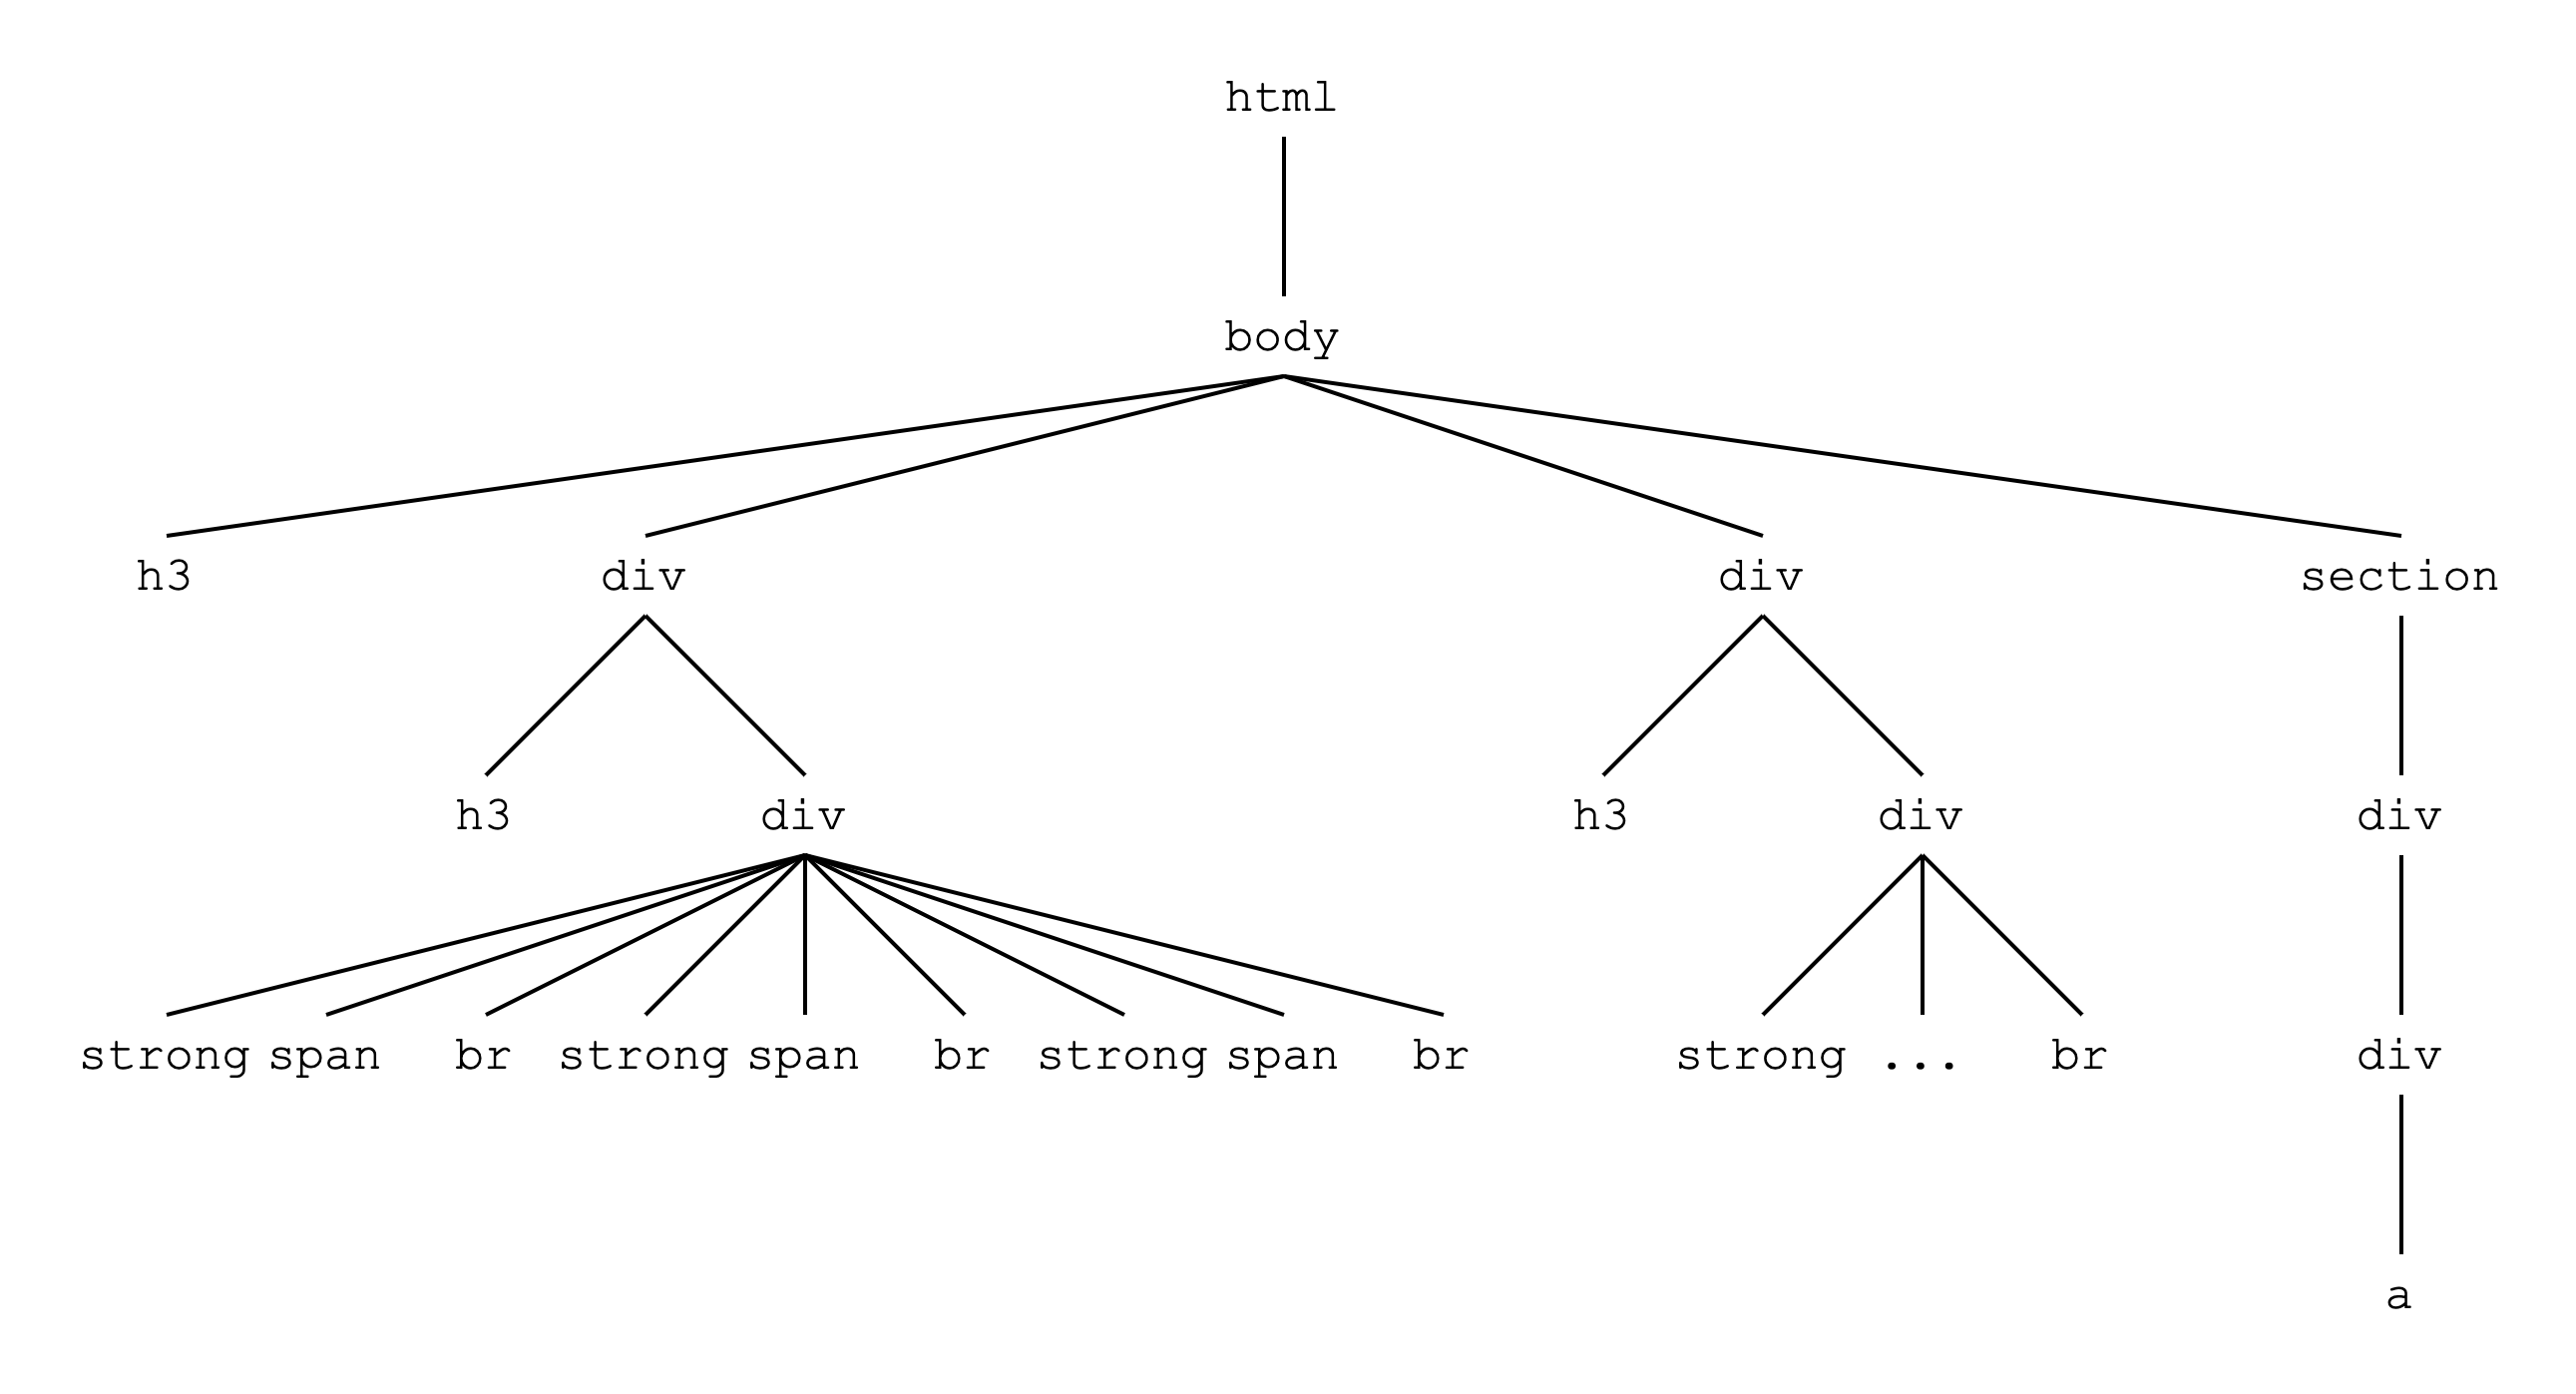 HTML document displayed as a tree